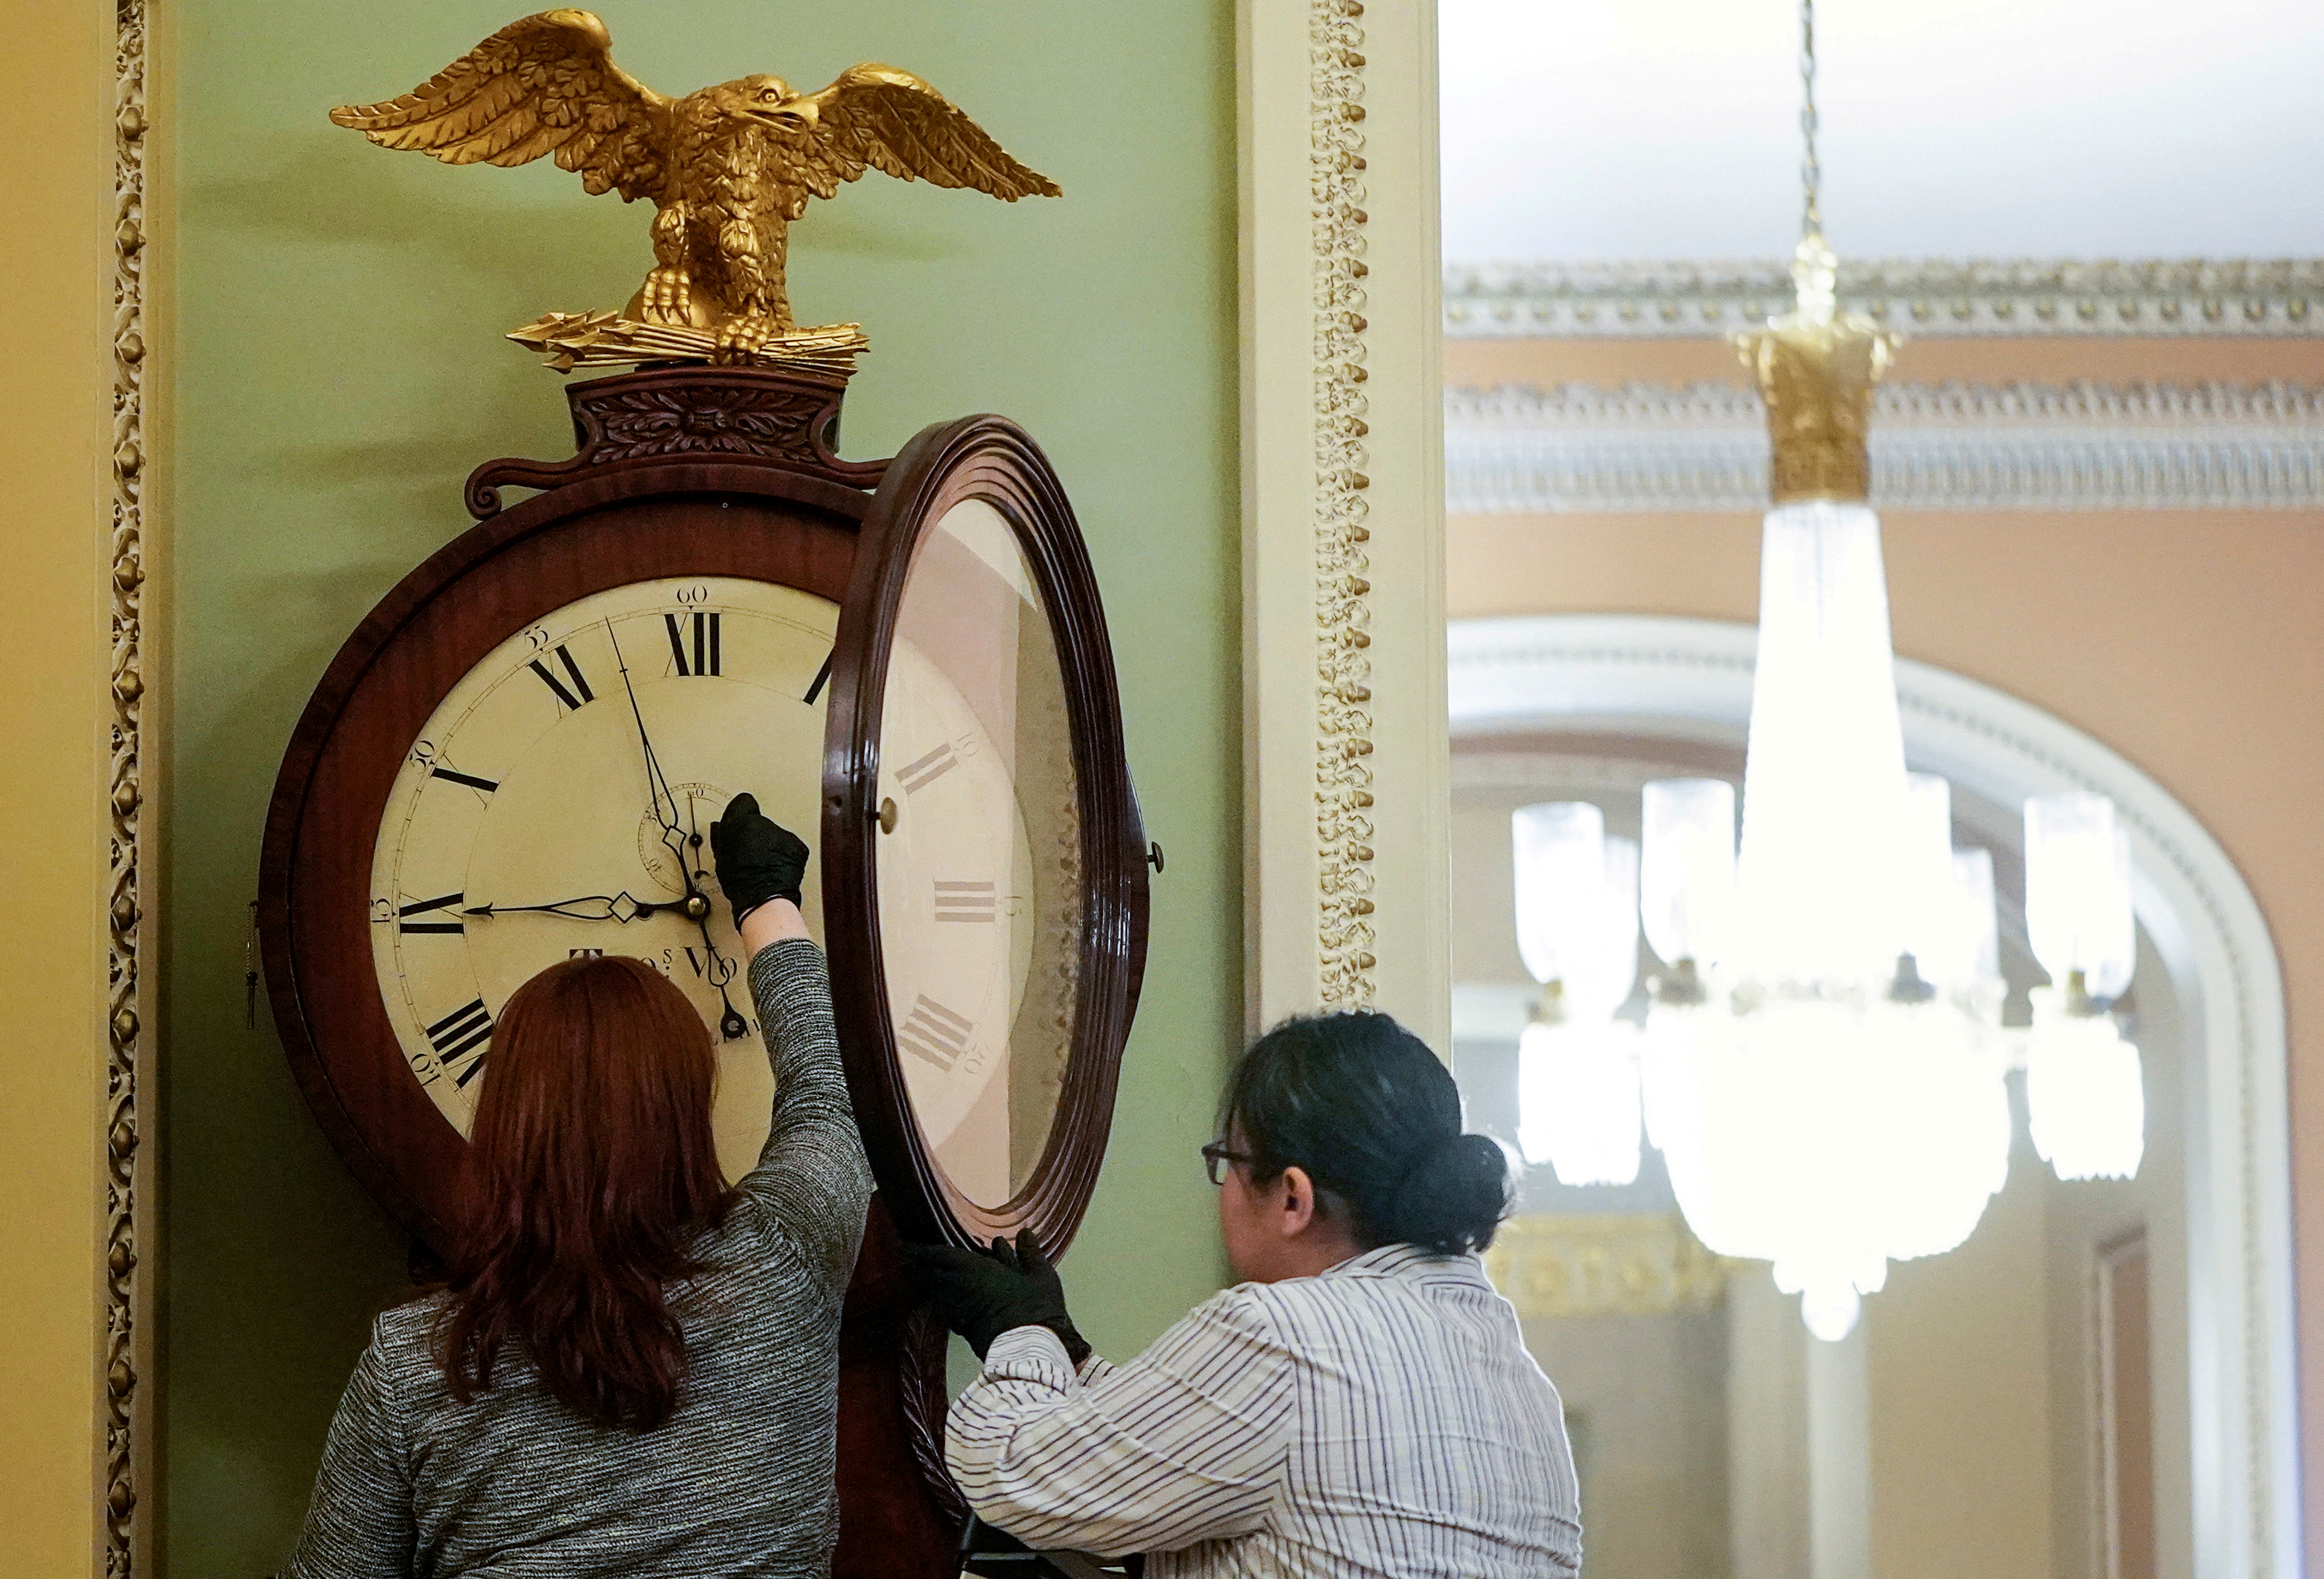 Architect of the Capitol workers wind Ohio Clock in Washington